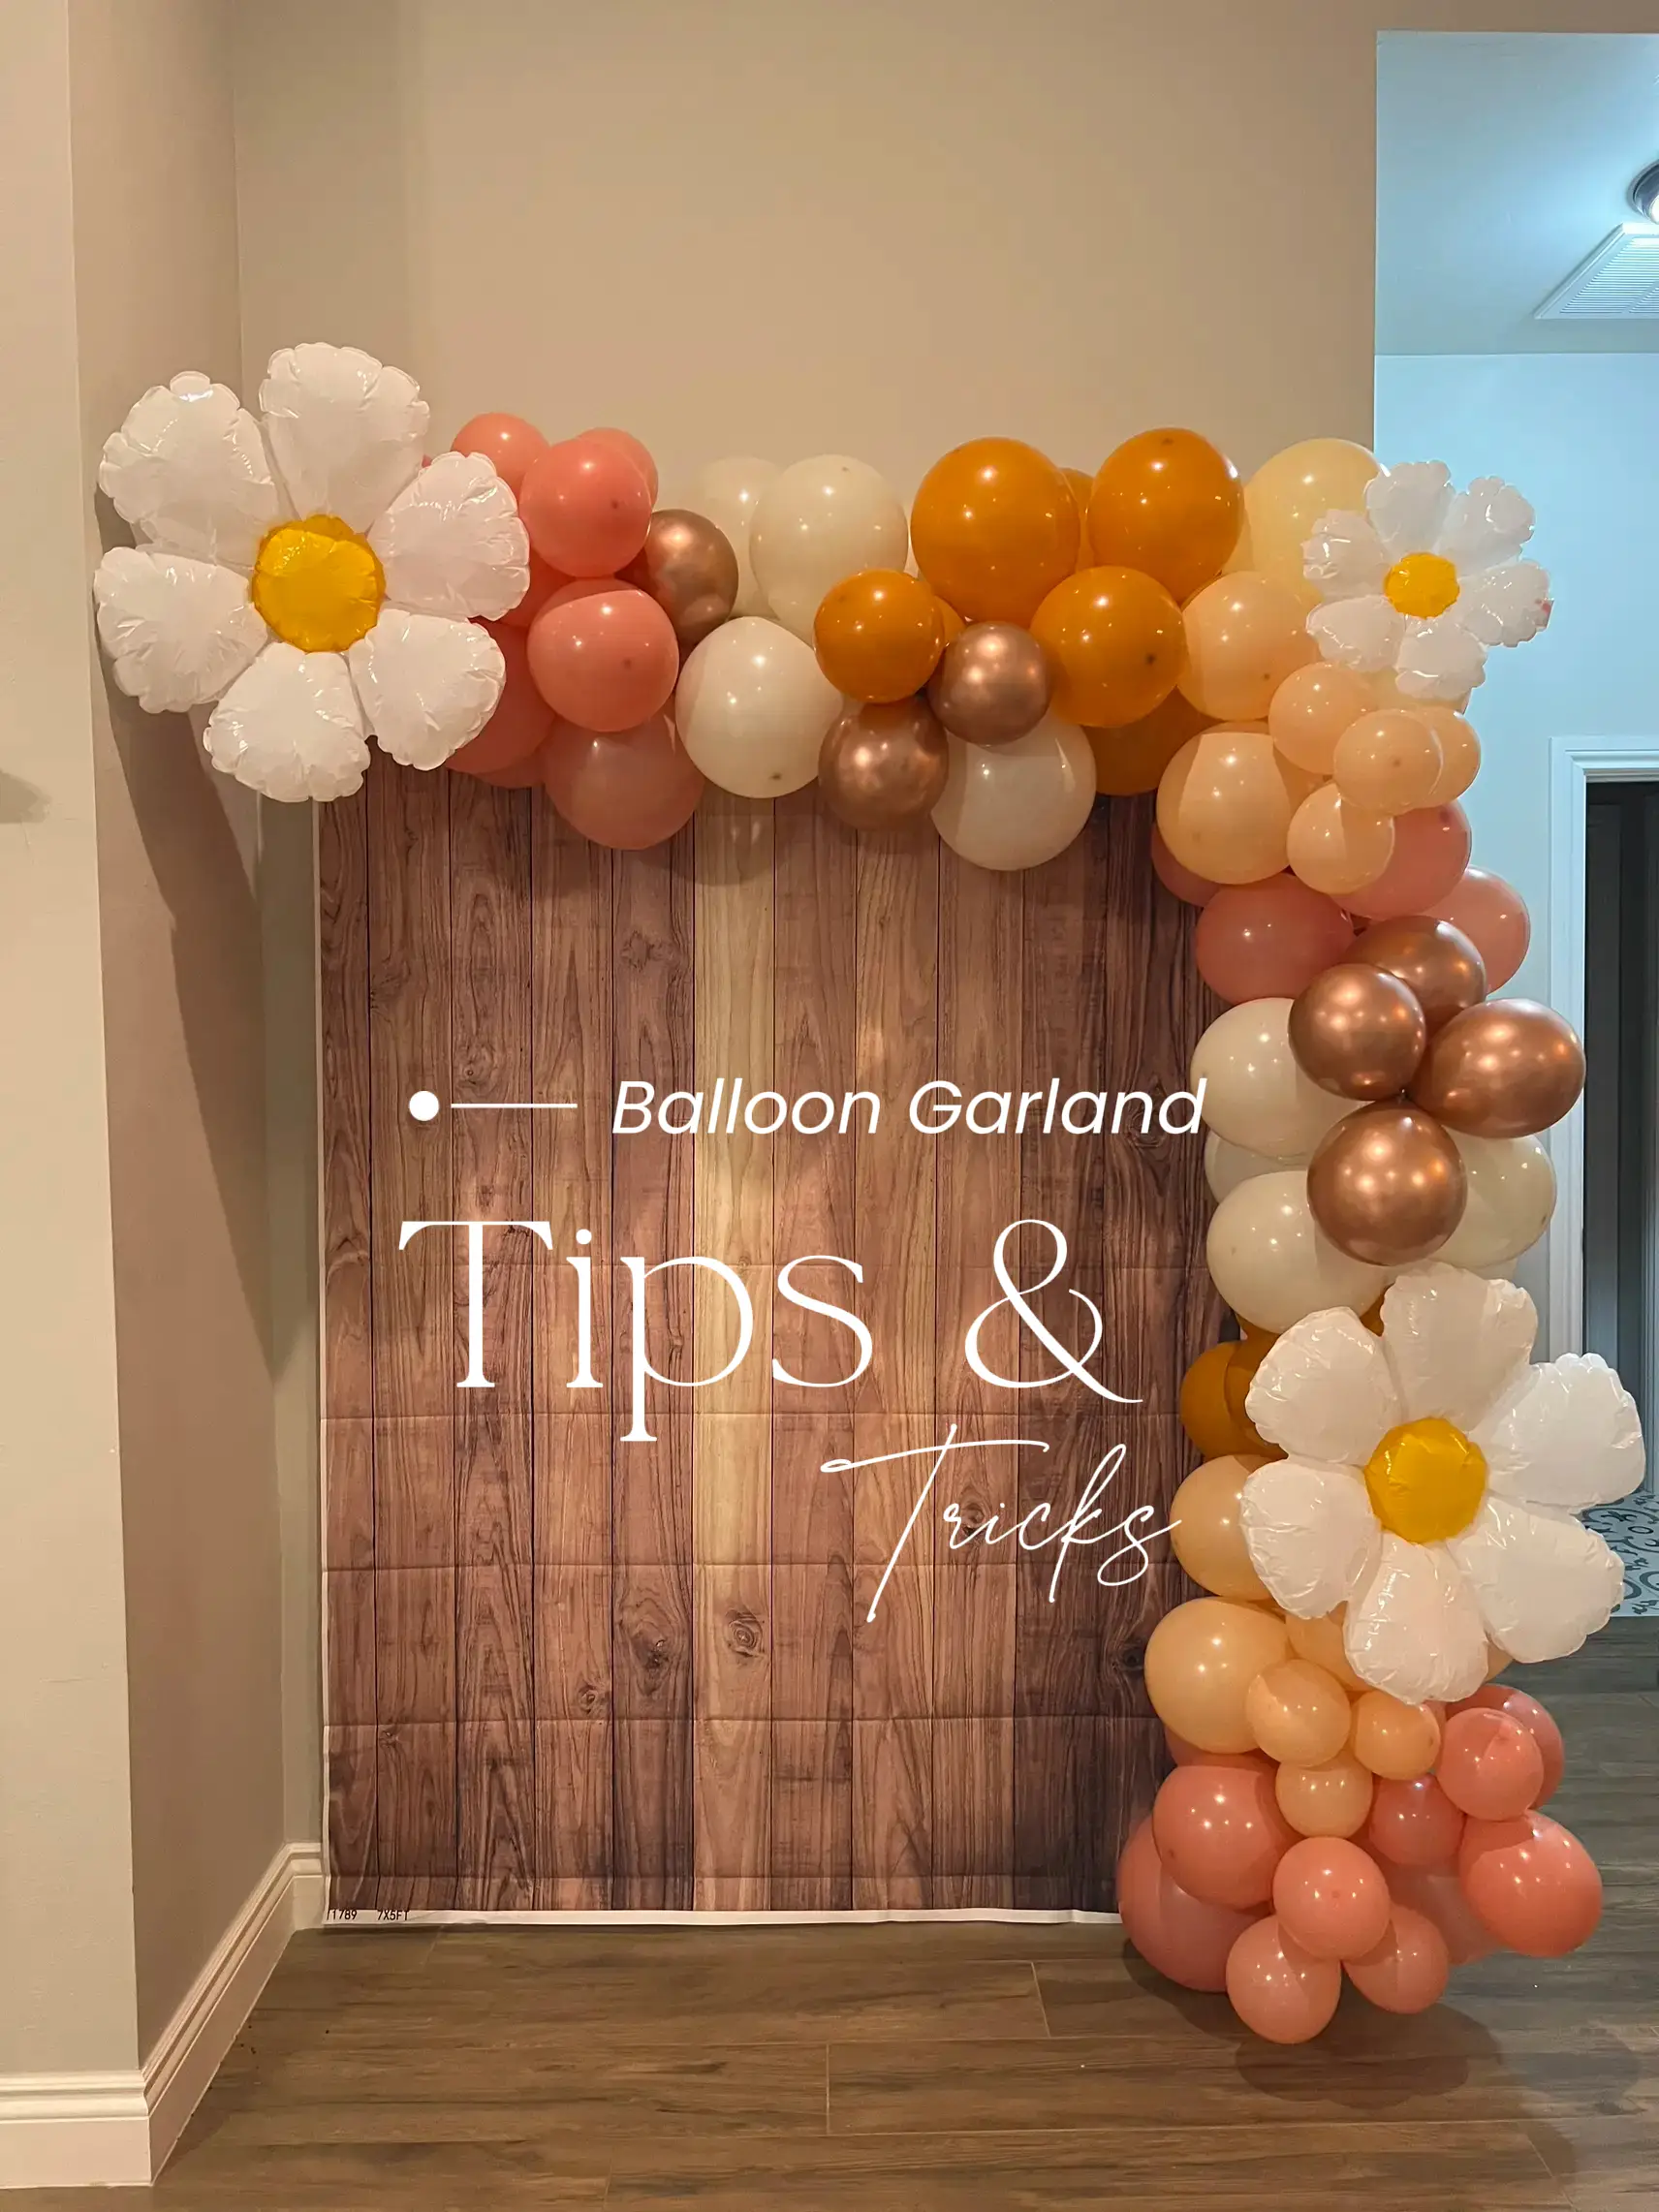 Balloon Garland tips & tricks, Gallery posted by Misty Tharp